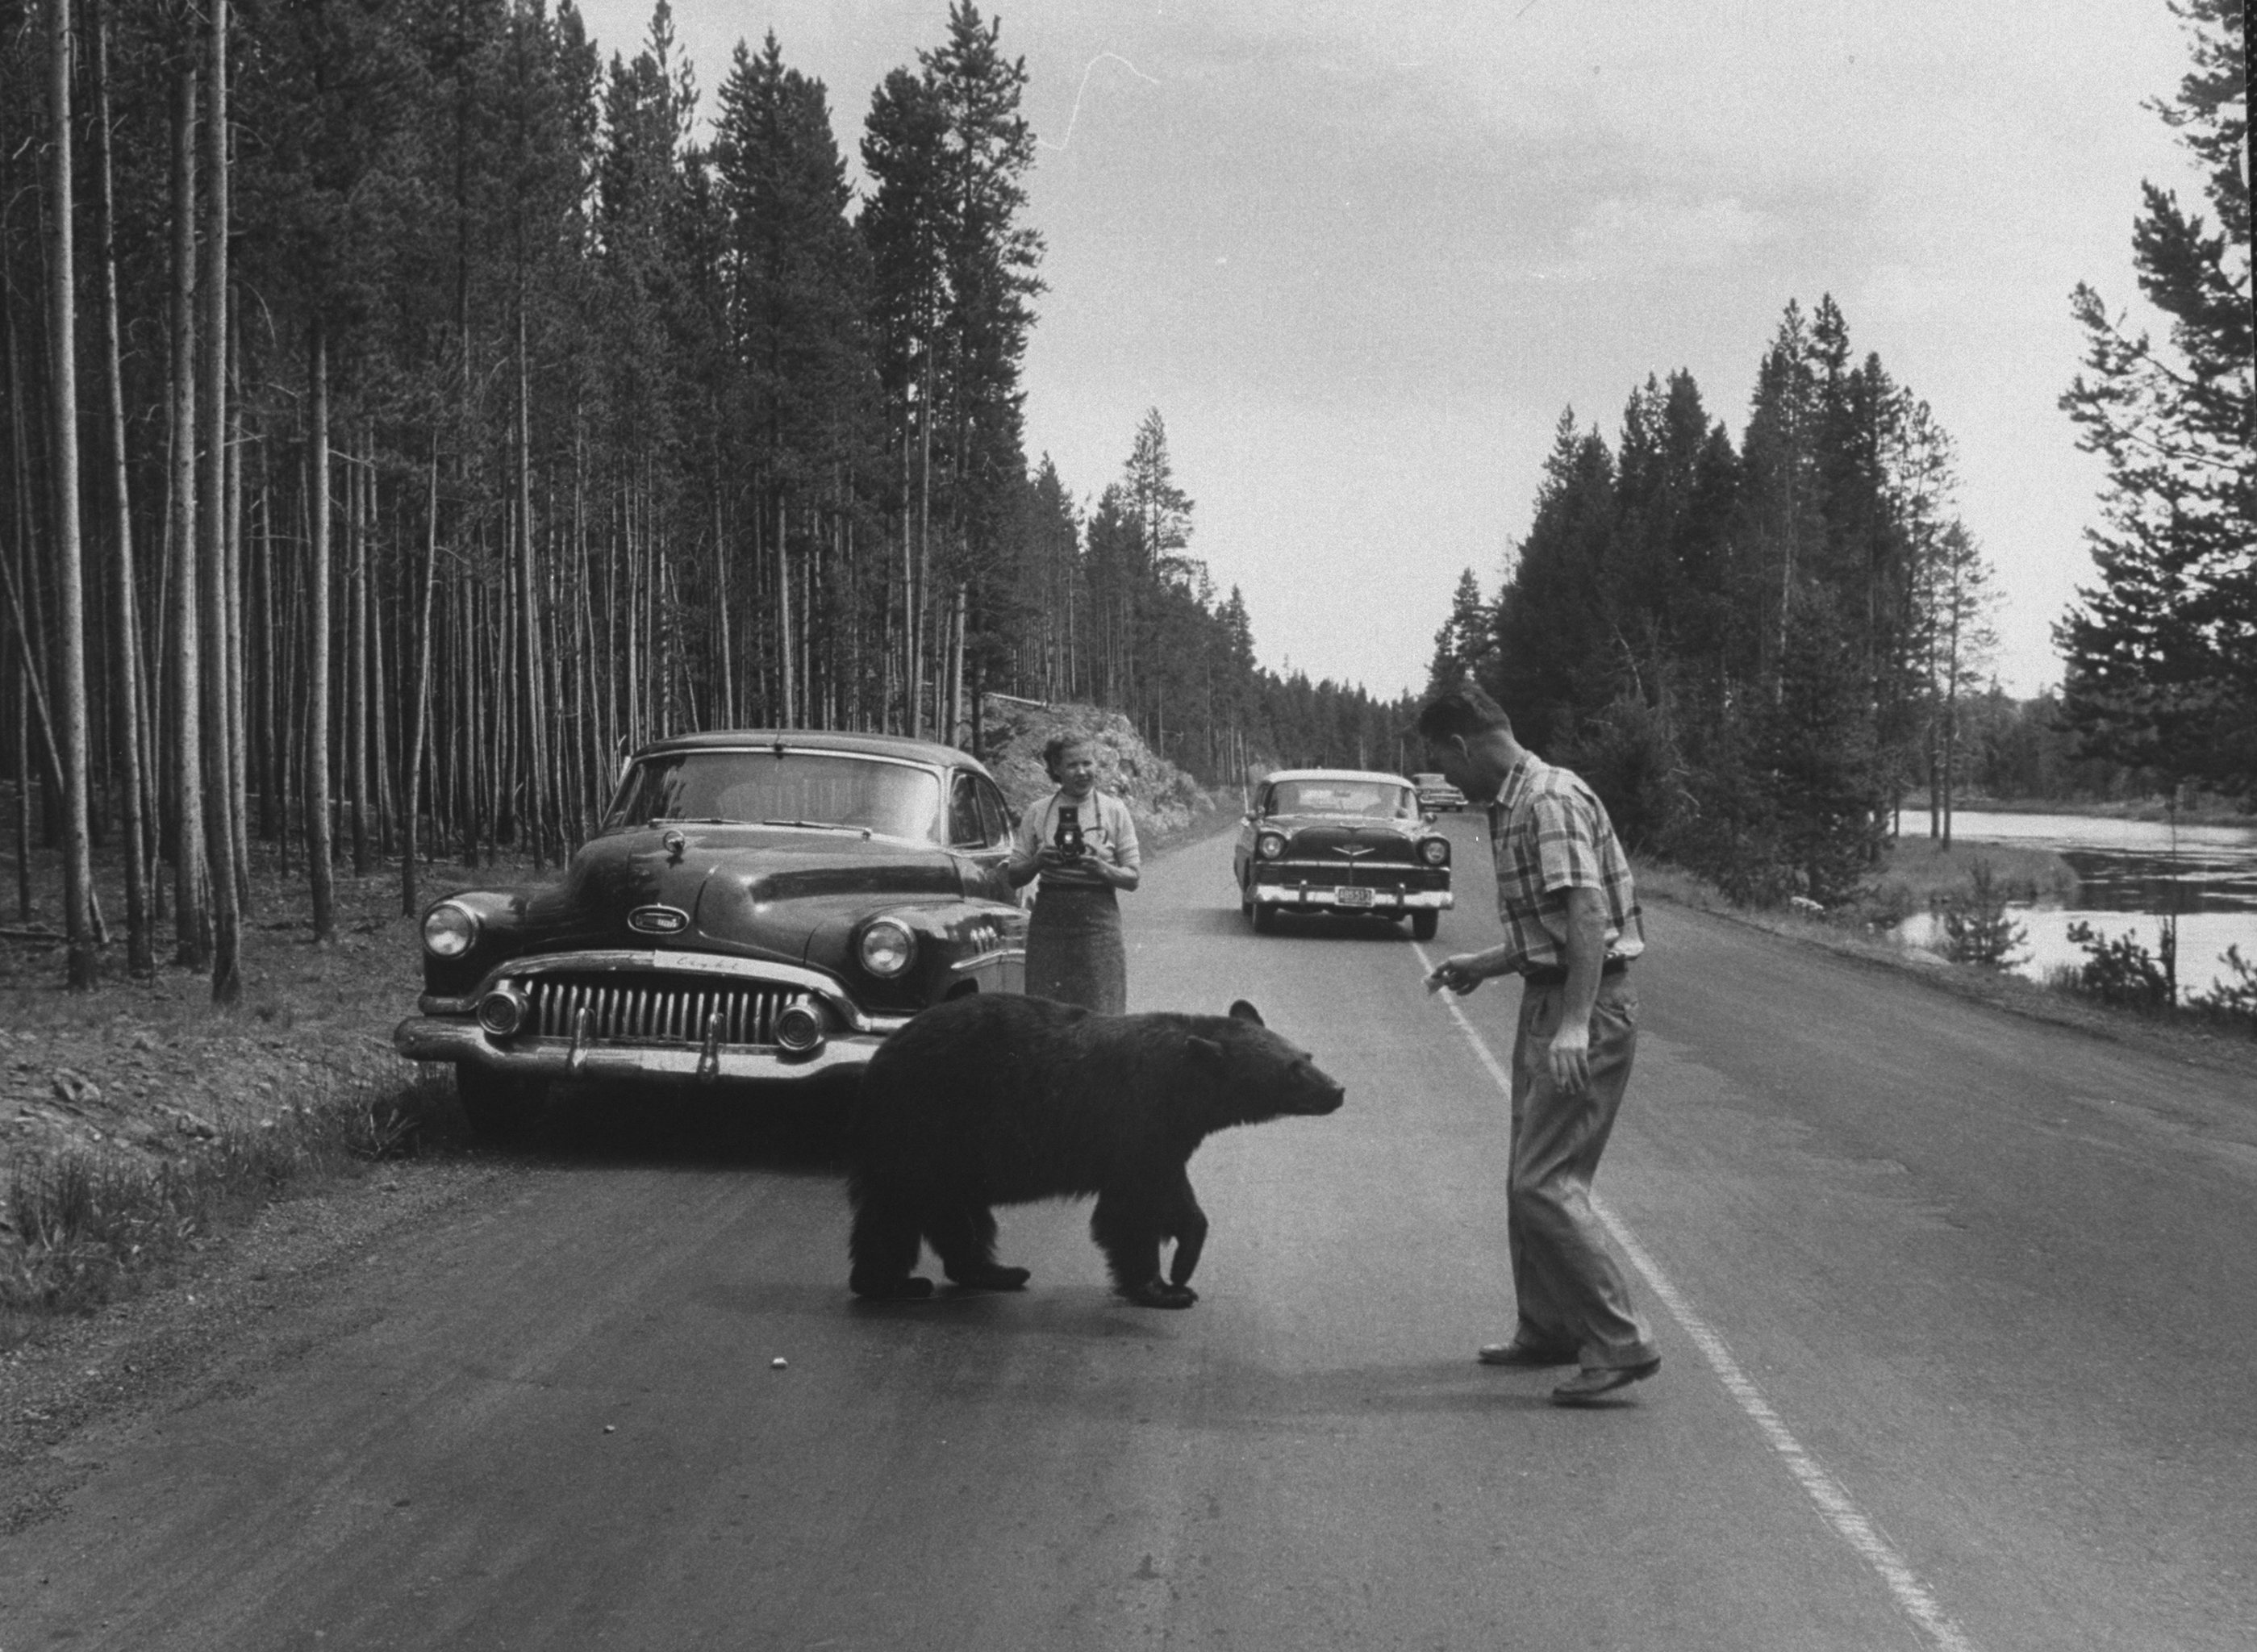 Man trying to feed a bear during his vis